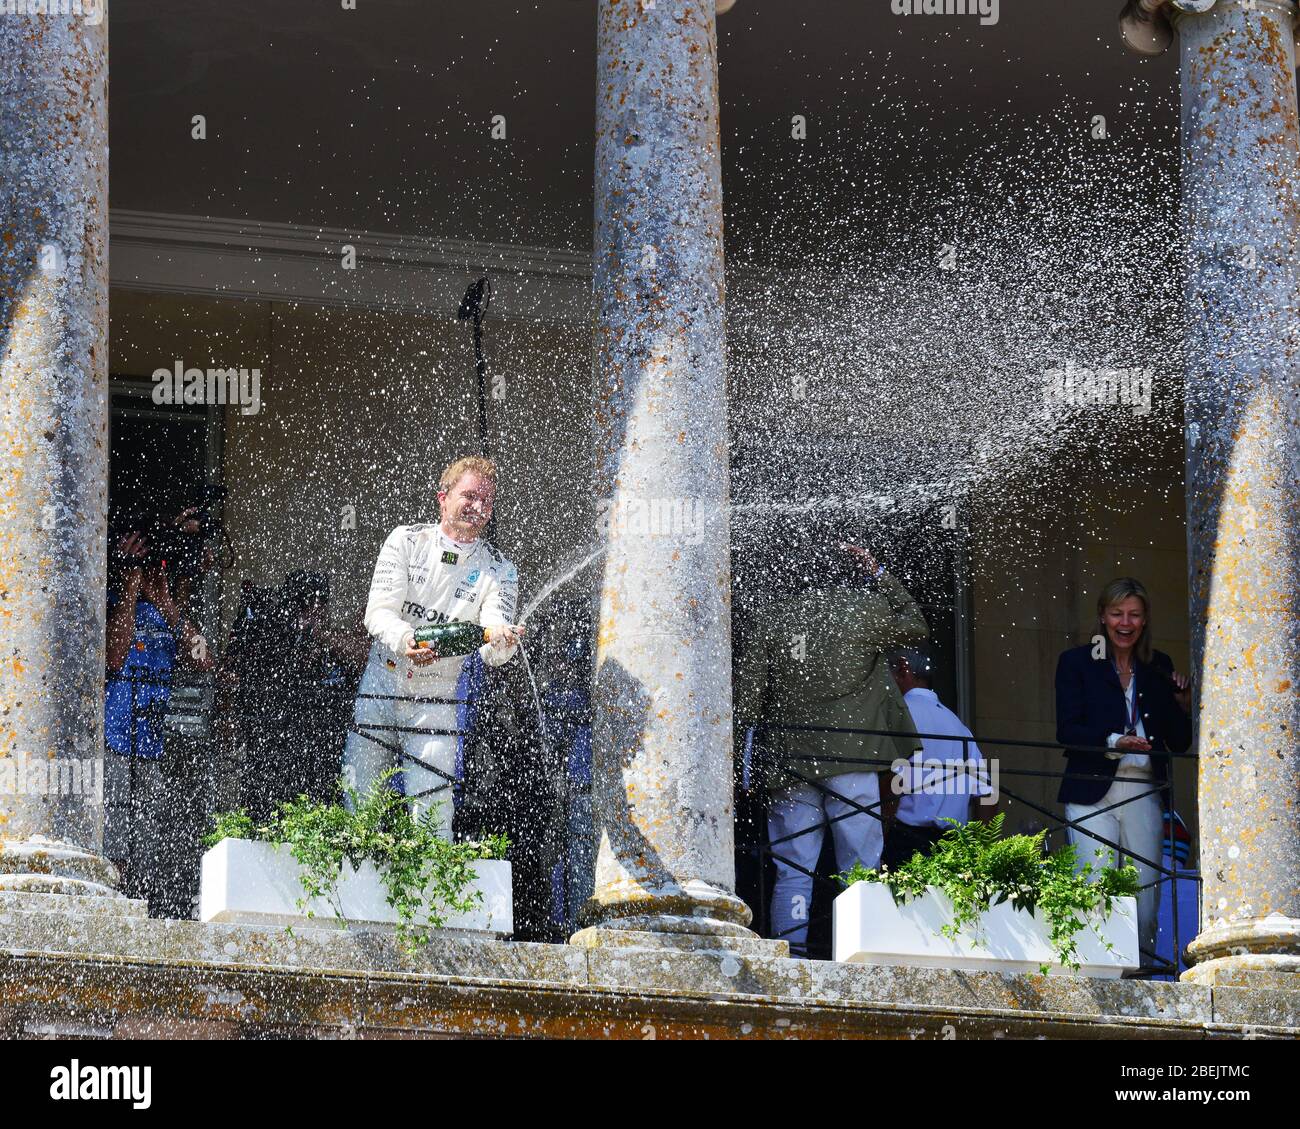 Nico Rosberg, spraying champagne, Goodwood Festival of Speed, 2017, Peaks of Performance, Motorsports Game Changers,  automobiles, cars, entertainment Stock Photo